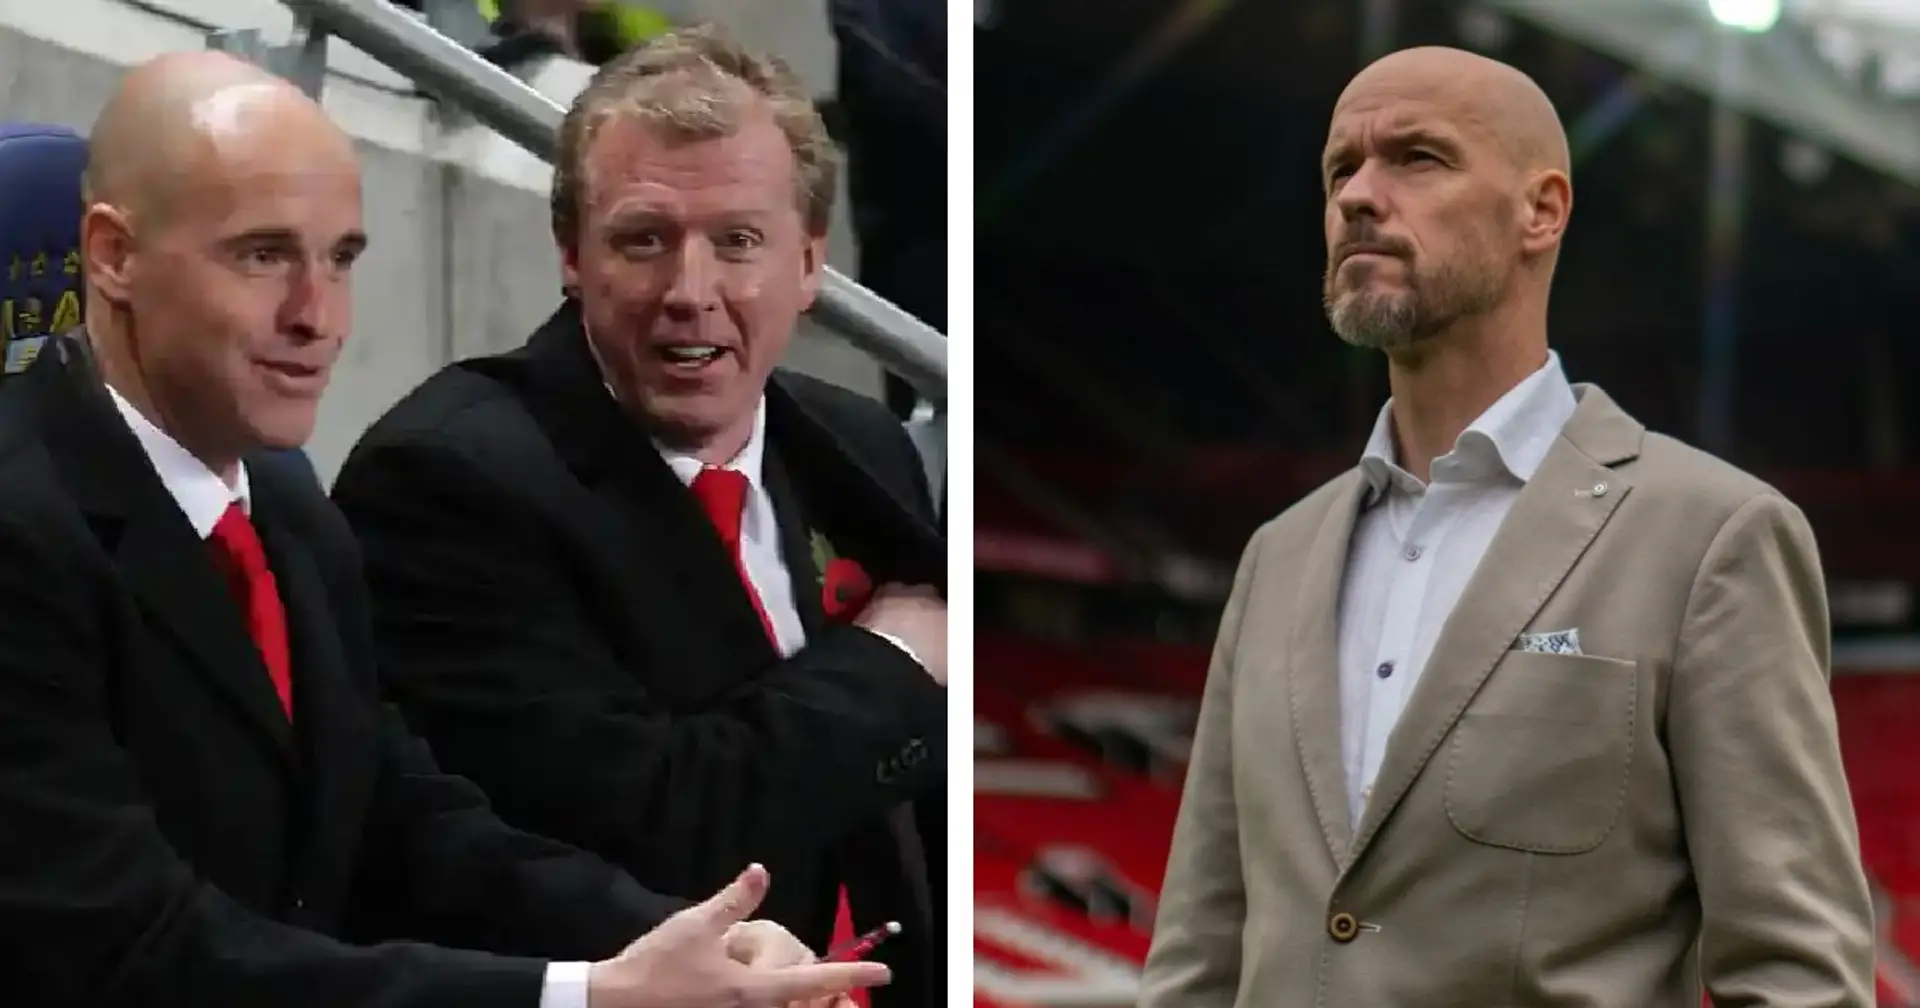 McClaren reveals how hard Ten Hag has been working in a 'mad' first week at the club